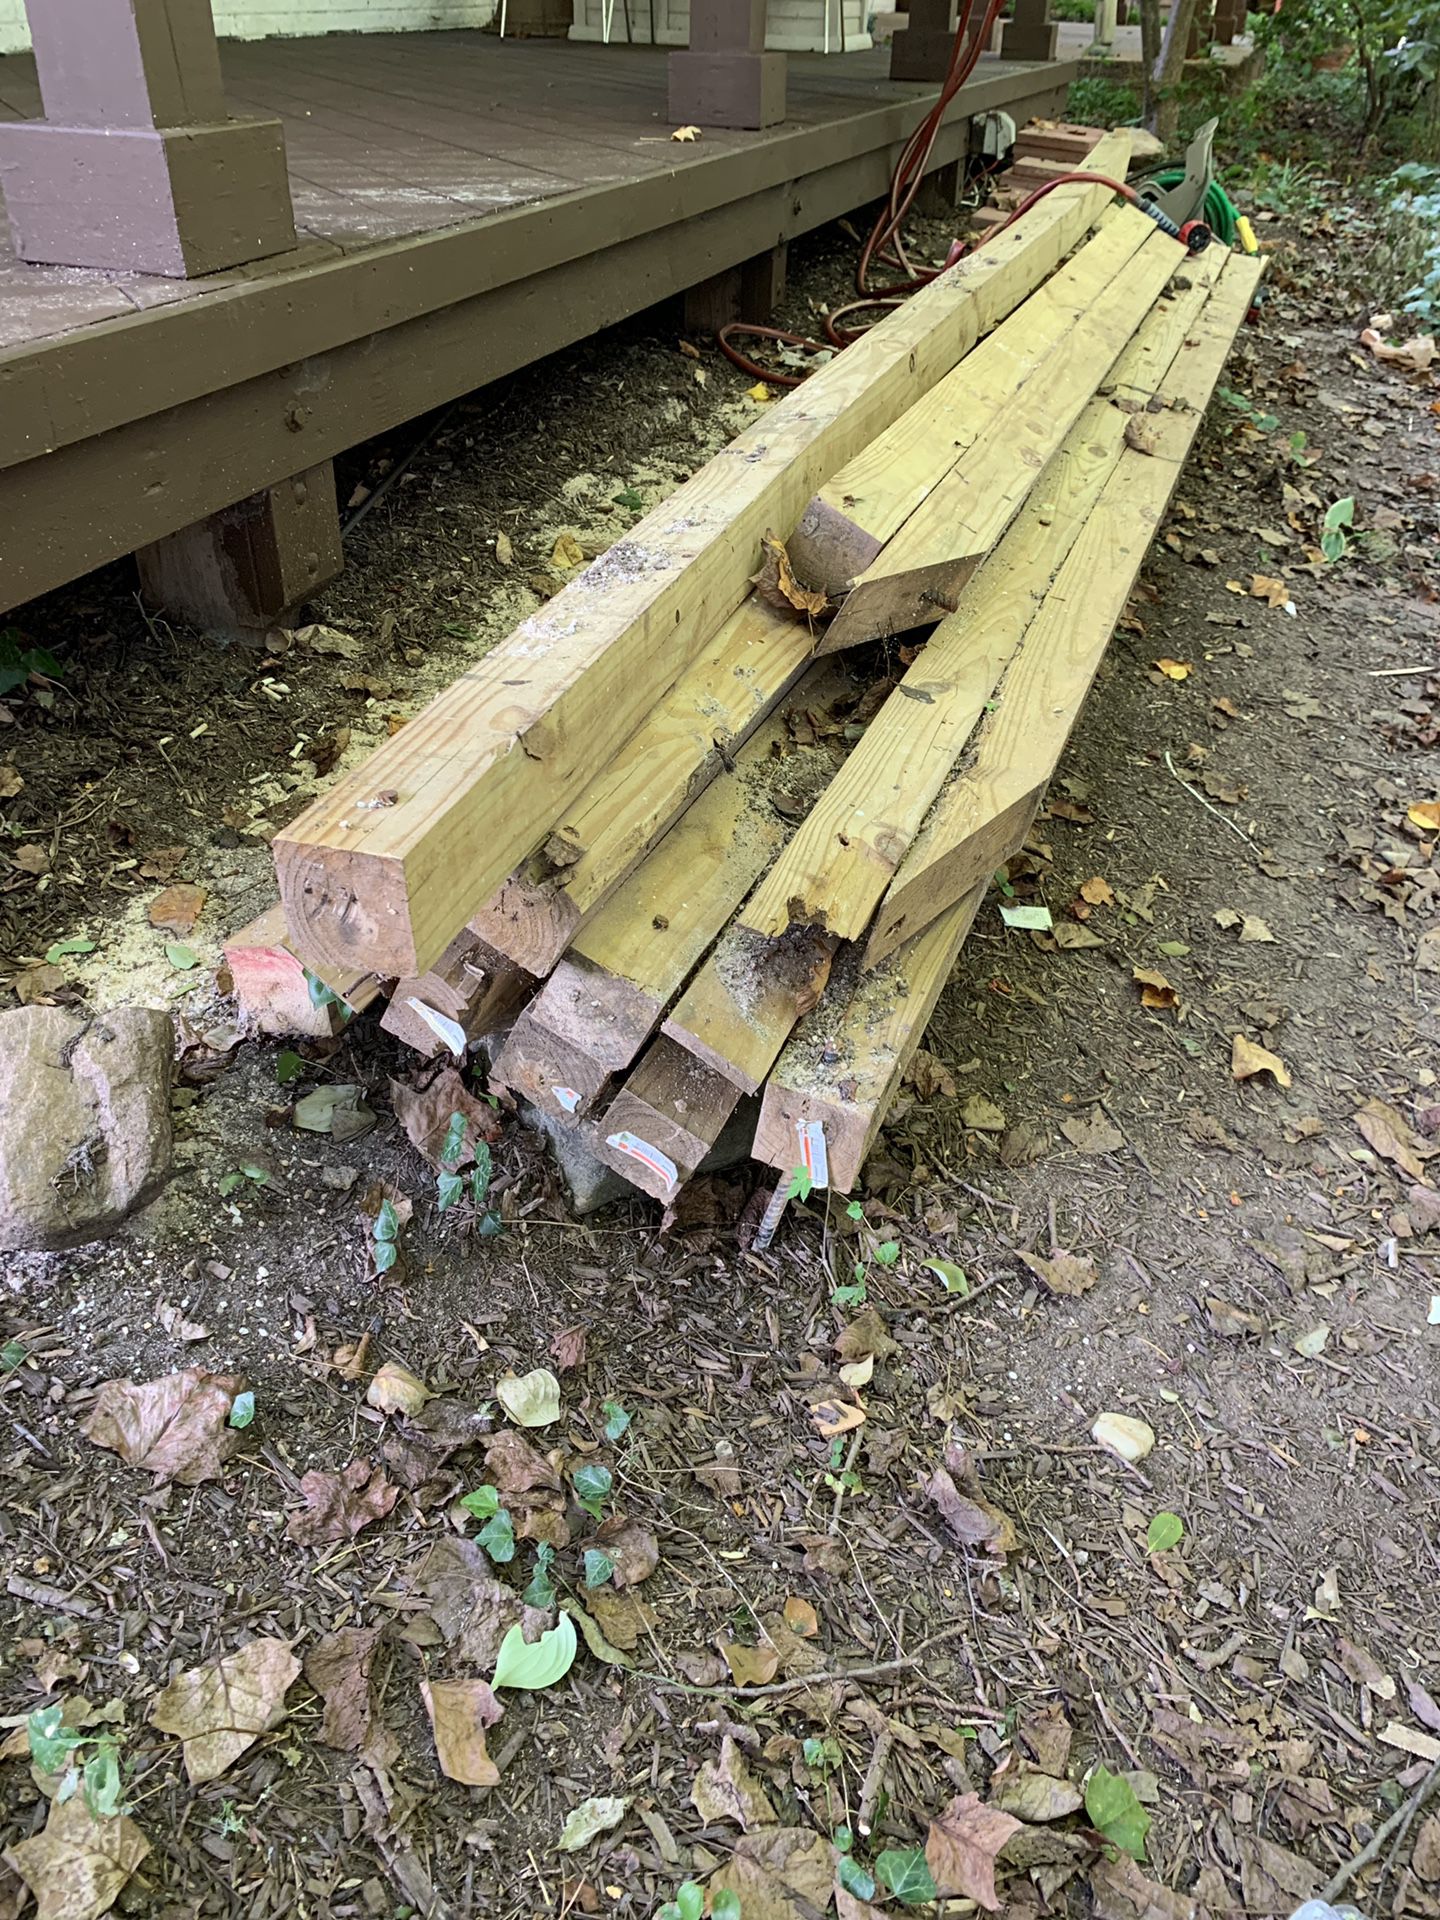 Construction woods. For $20 obo